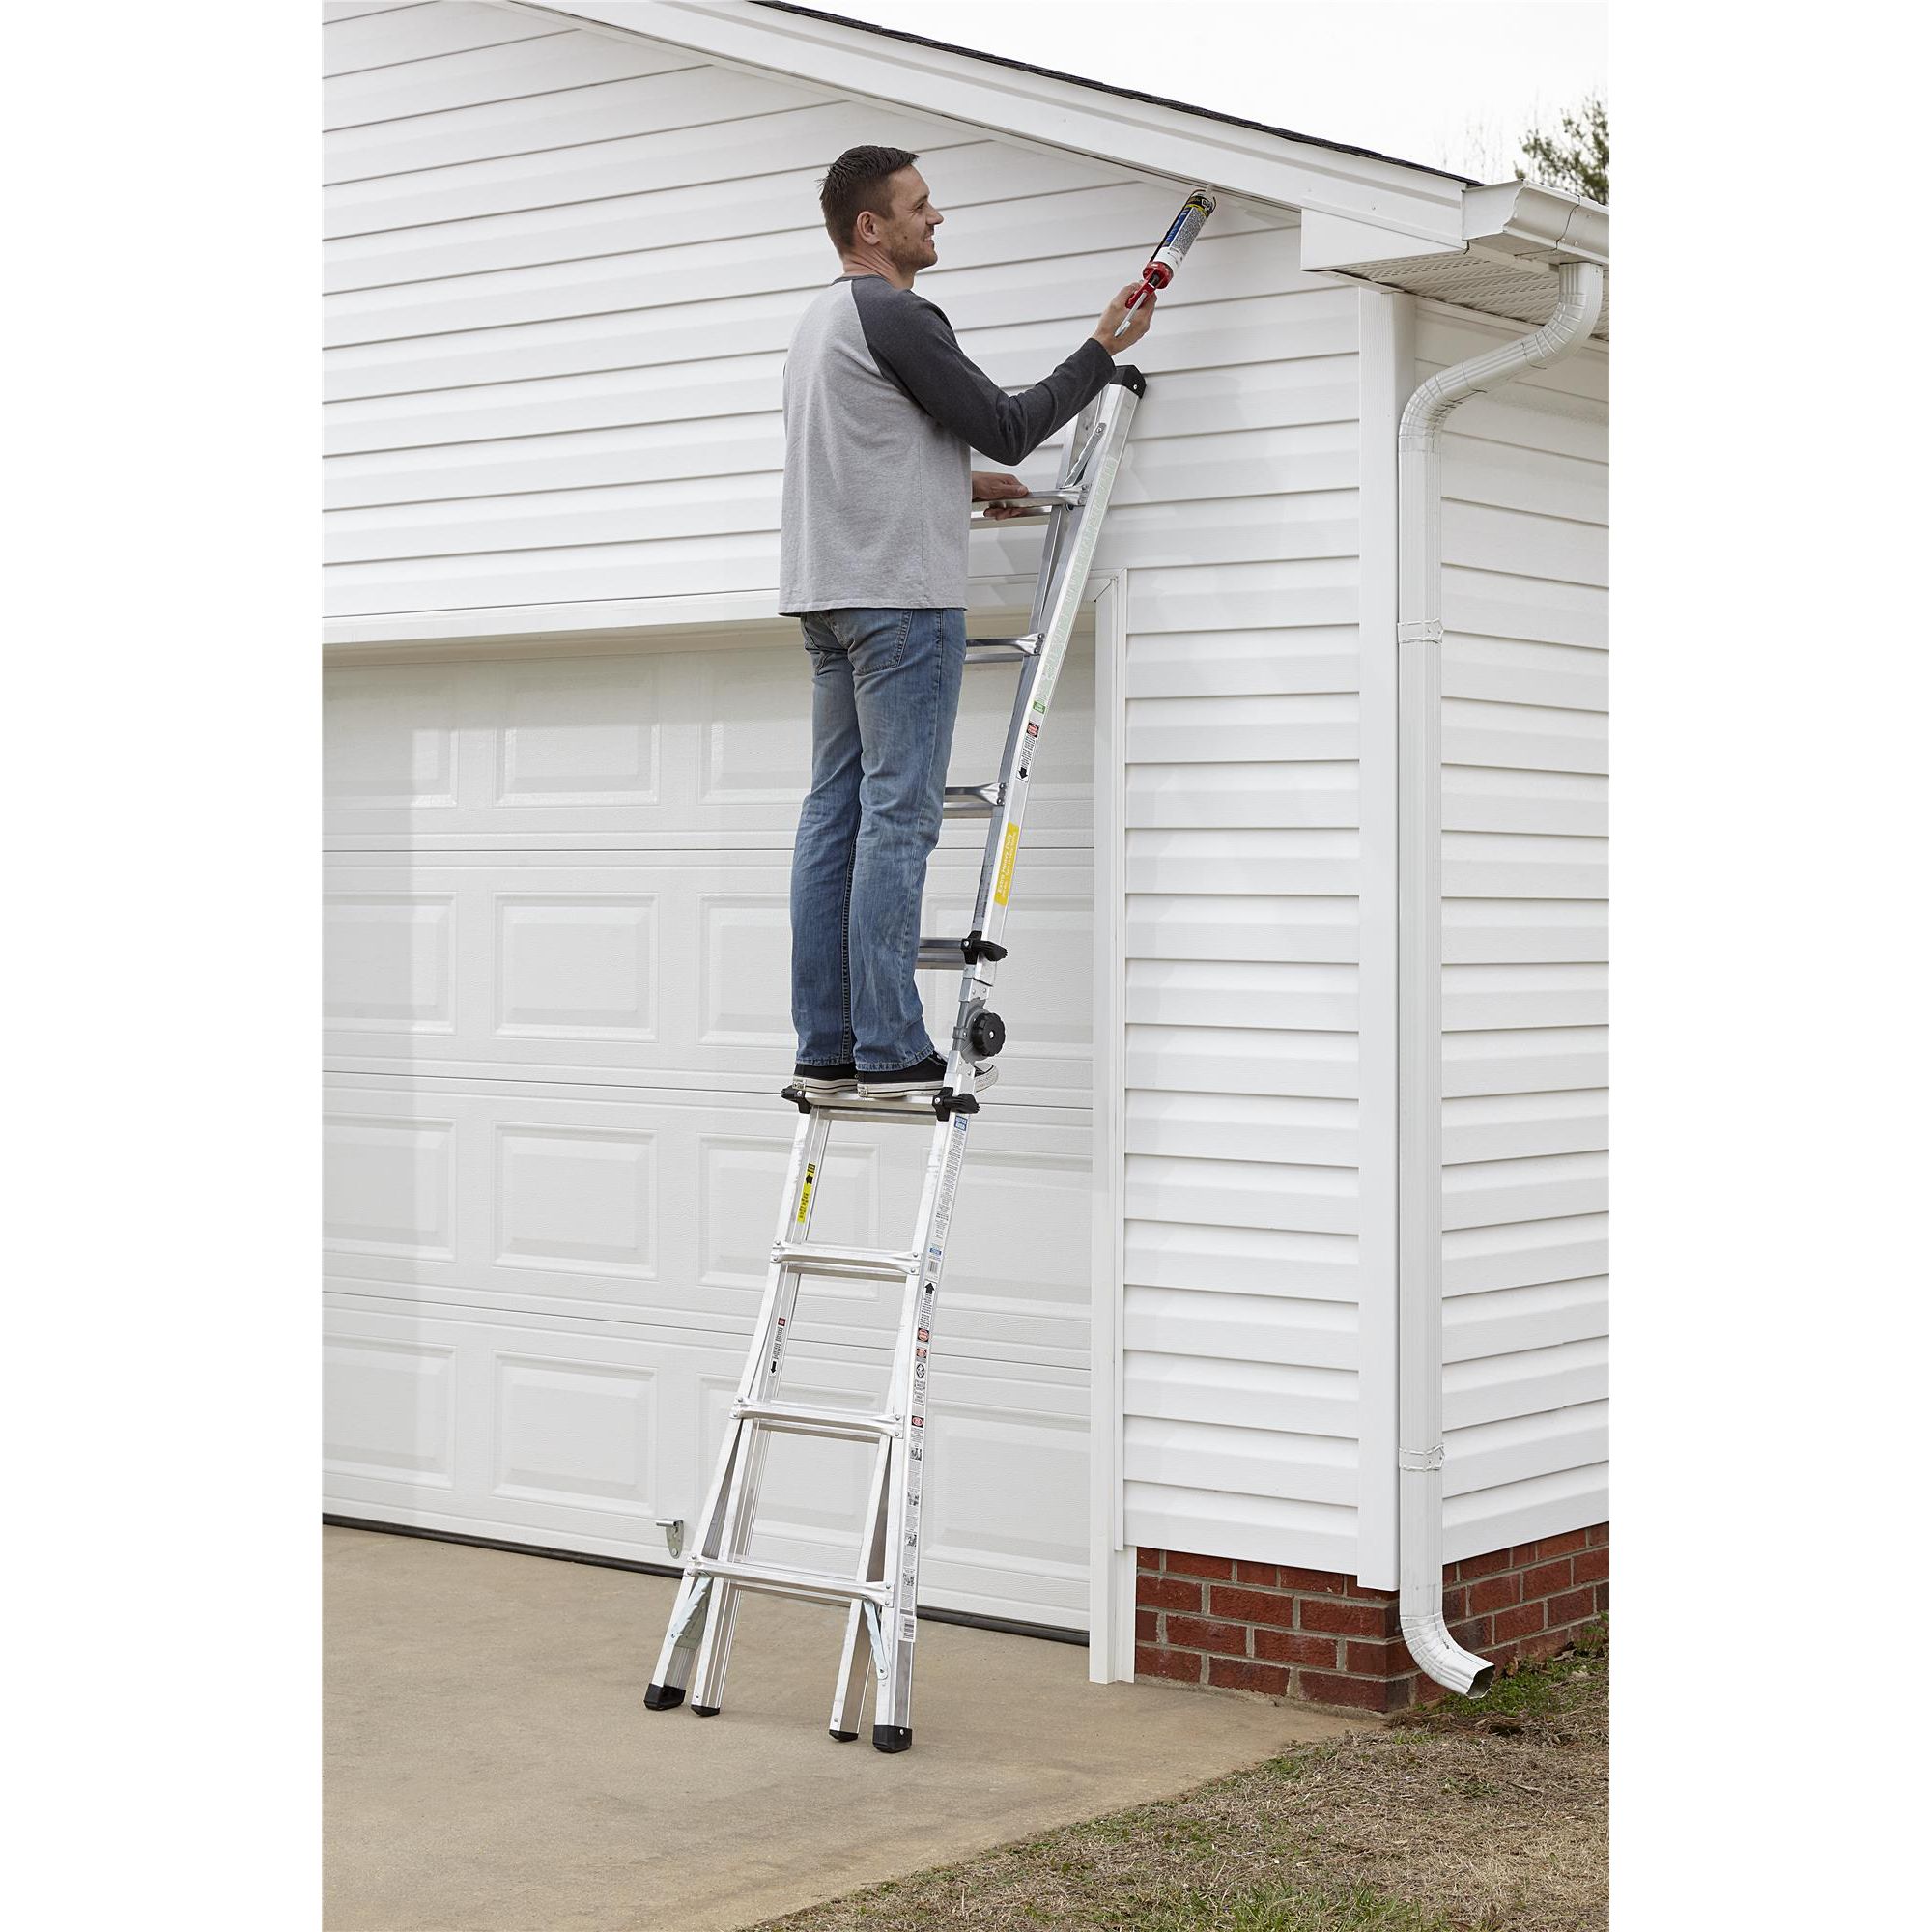 18 Ft. Height Multi-Position Ladder - Cosco